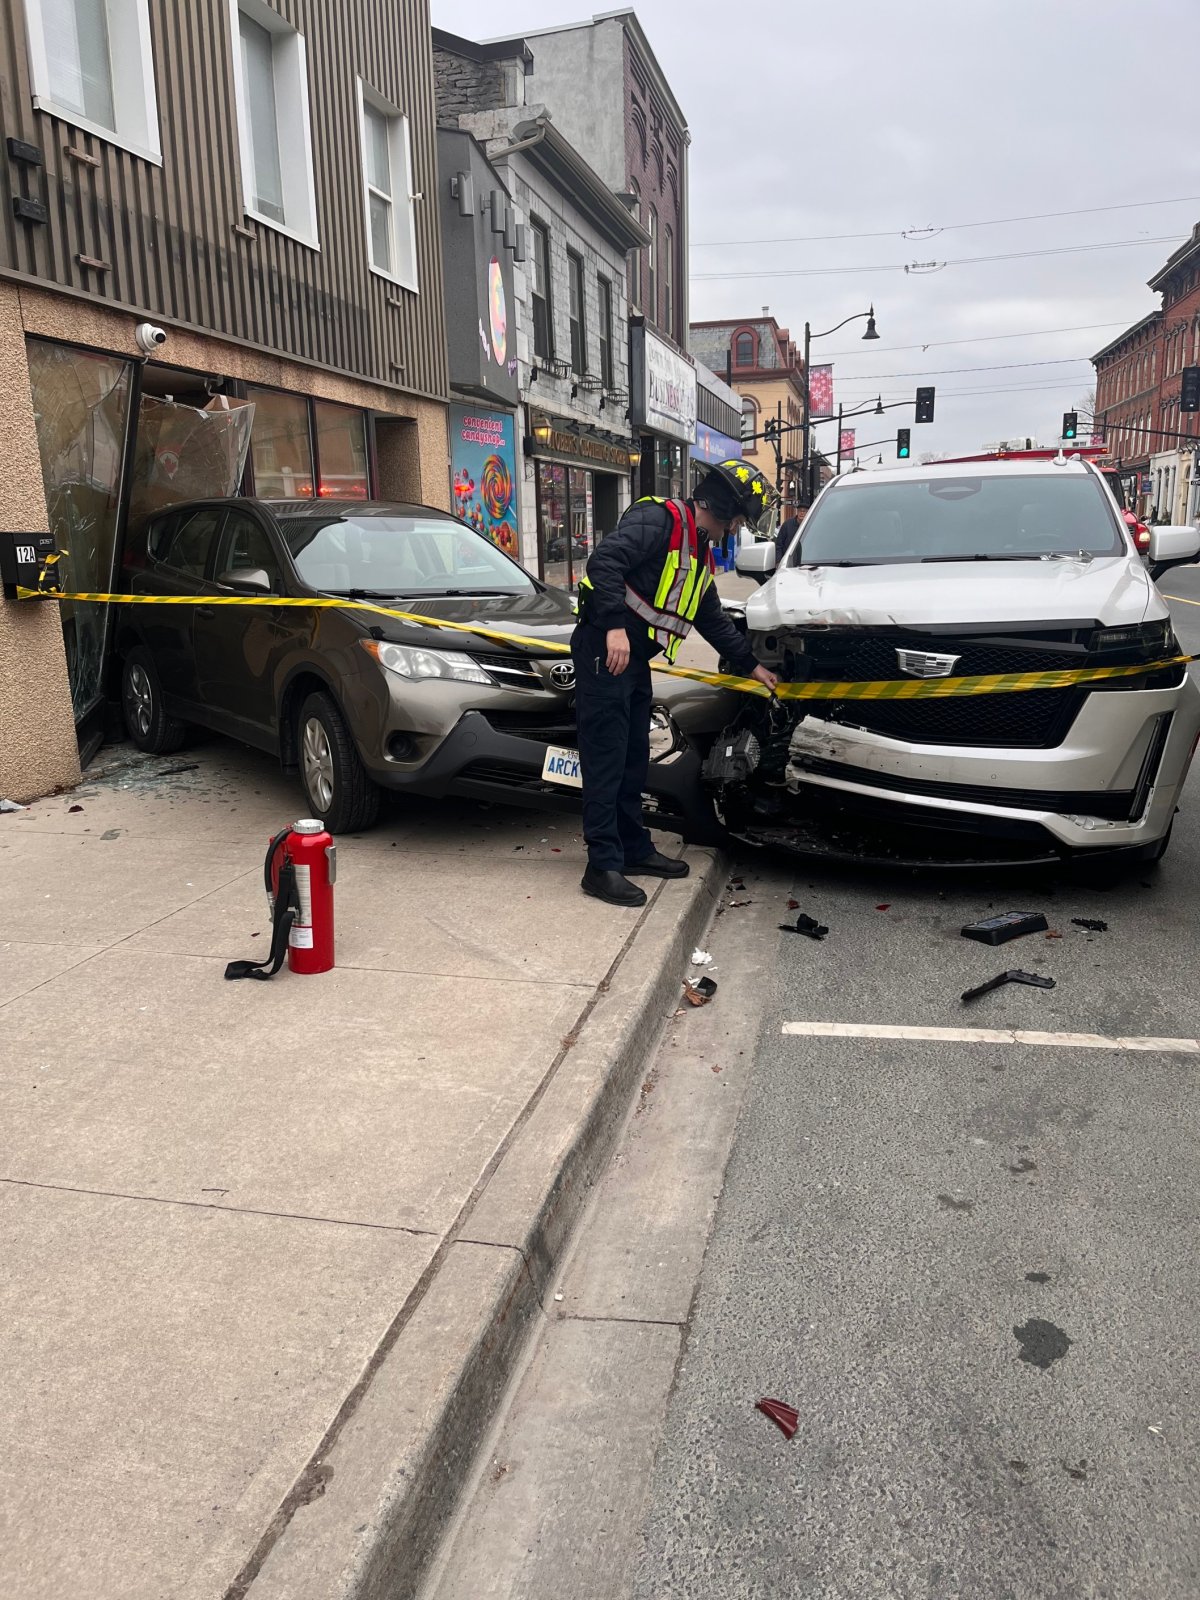 An 87-year-old woman from Odessa has been charged after a vehicle crashed into a building and another vehicle in Napanee on Tuesday.